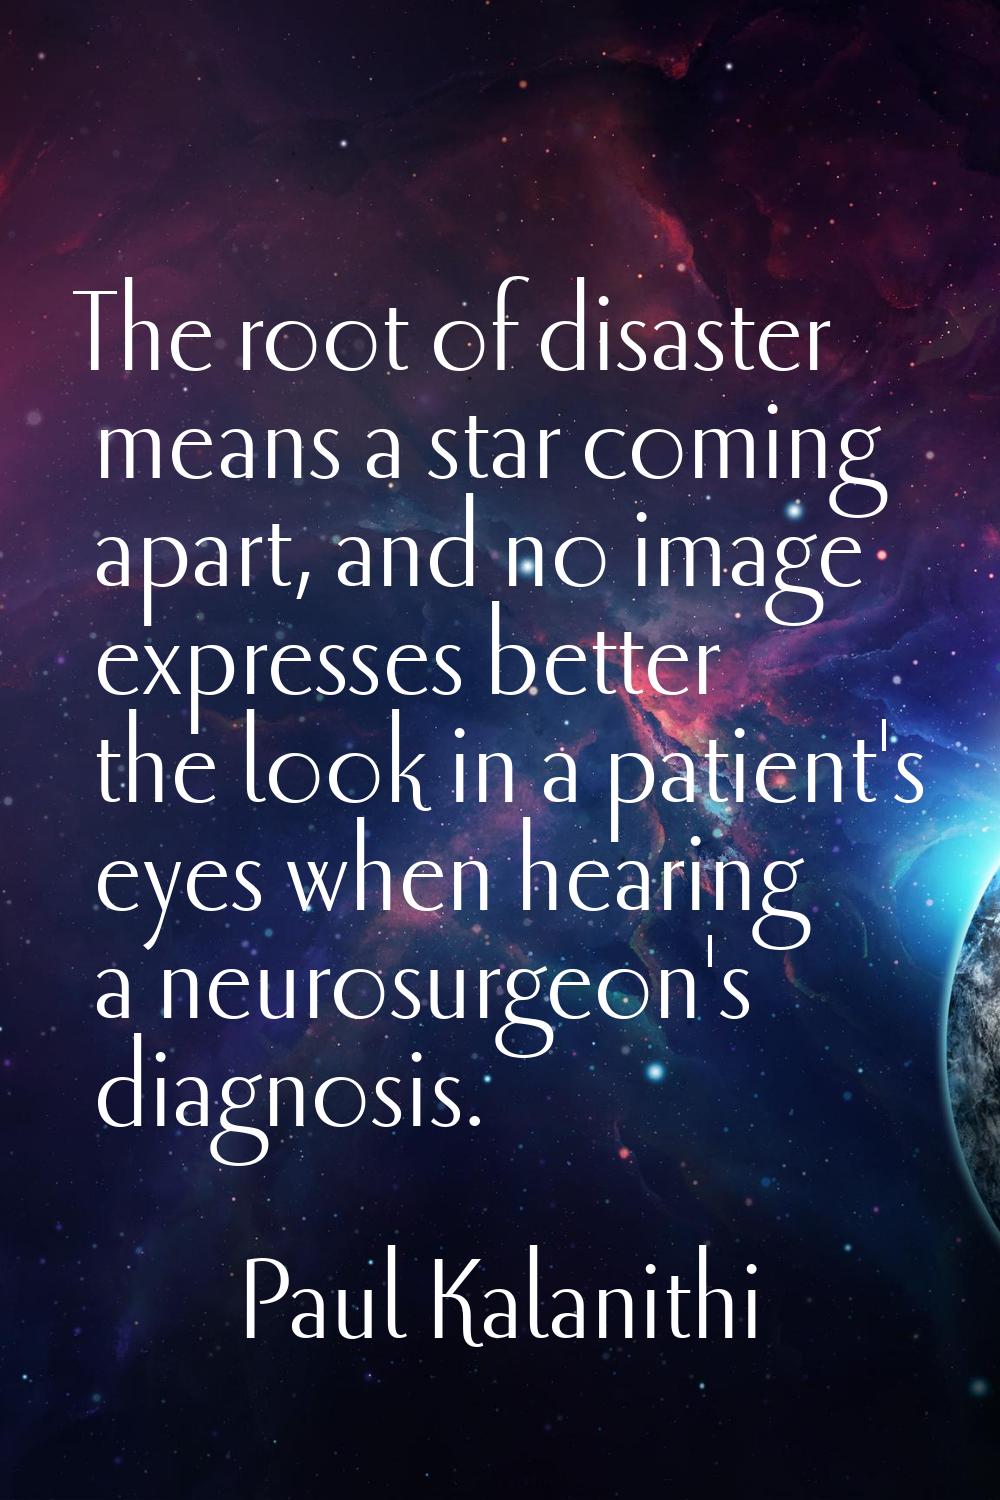 The root of disaster means a star coming apart, and no image expresses better the look in a patient